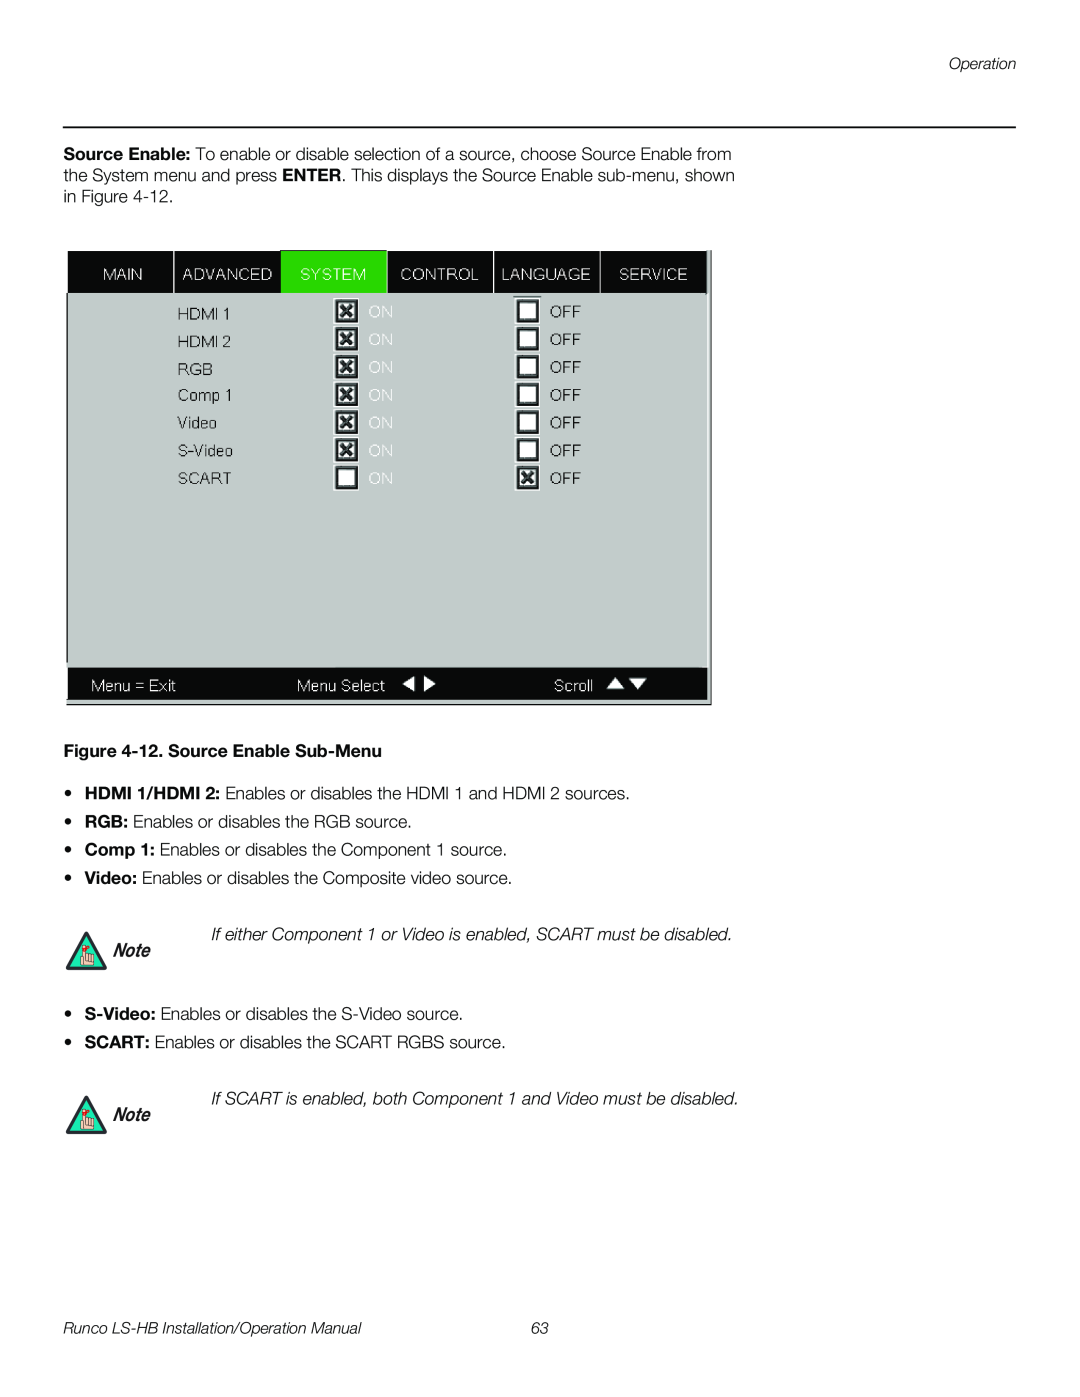 Runco LS-HB operation manual 12. Source Enable Sub-Menu, If either Component 1 or Video is enabled, SCART must be disabled 